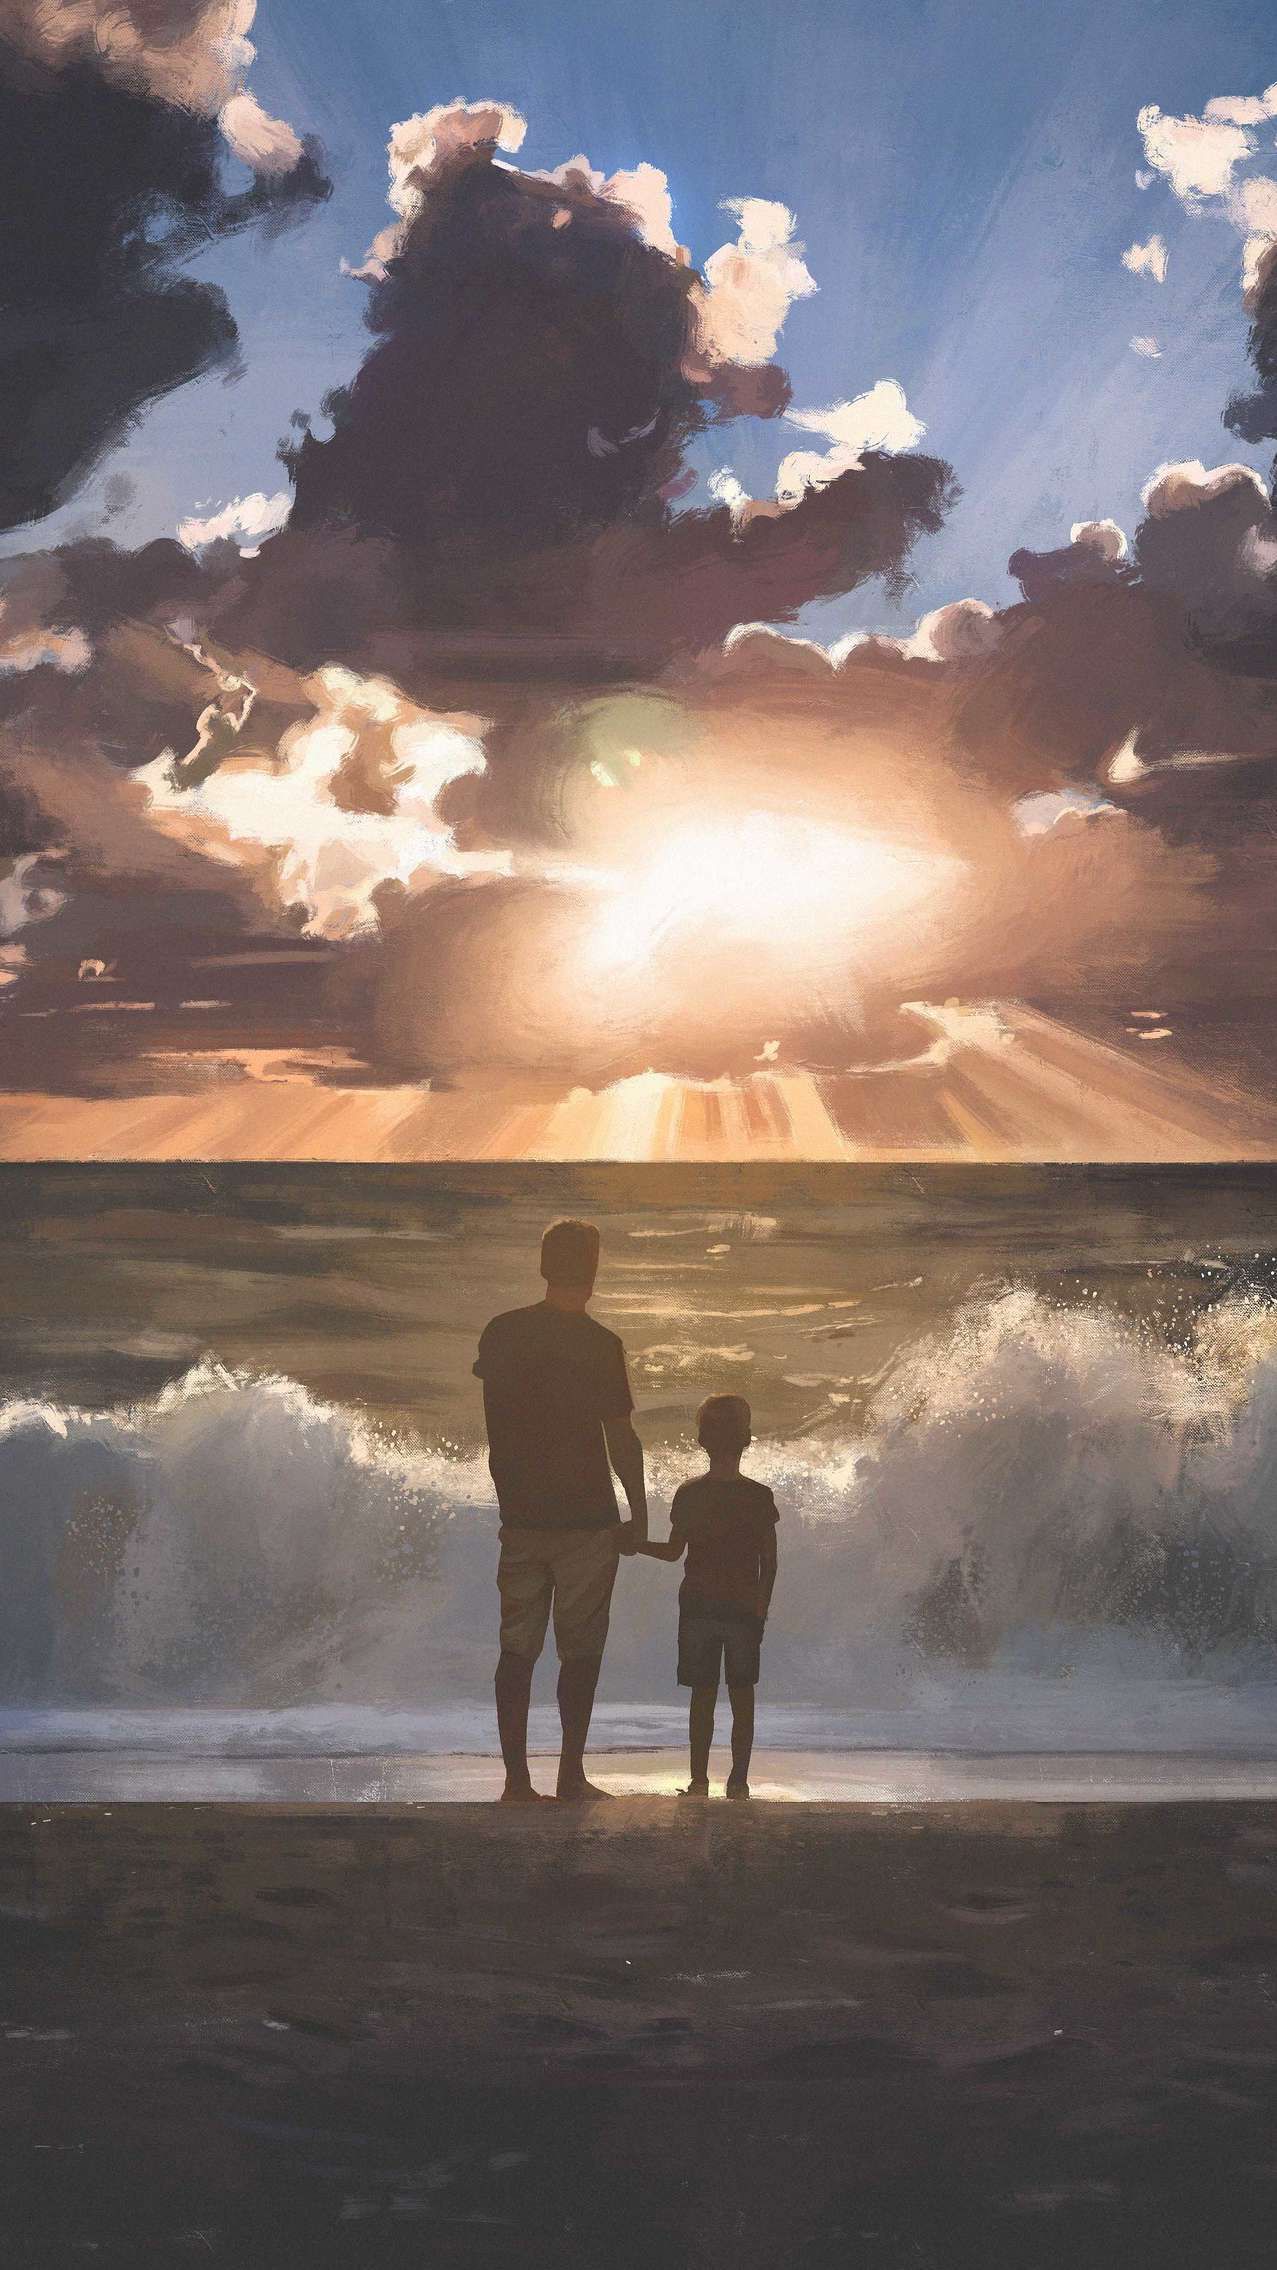 Download Father And Son IPhone Wallpaper Top Free Awesome